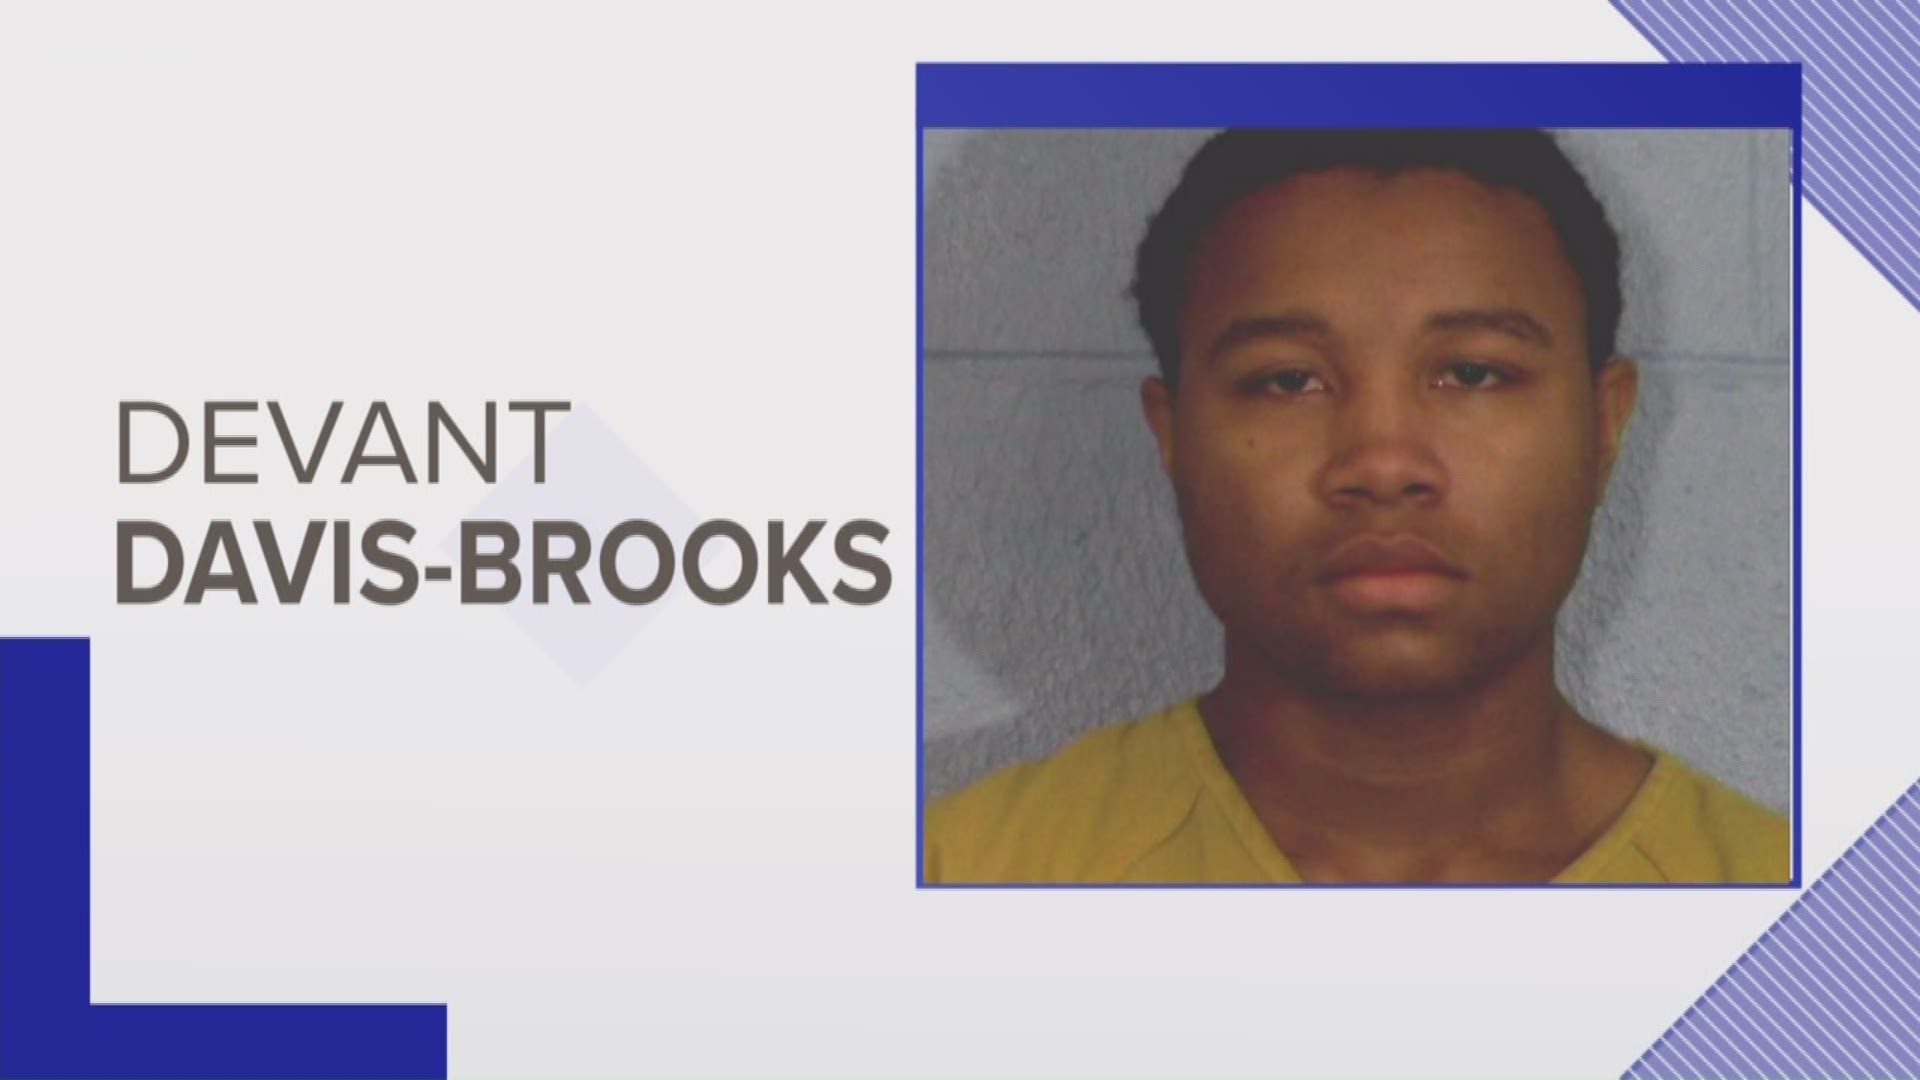 We are learning more about why a former Taylor High School student was arrested and what led to his terroristic threat charges while playing a video game.